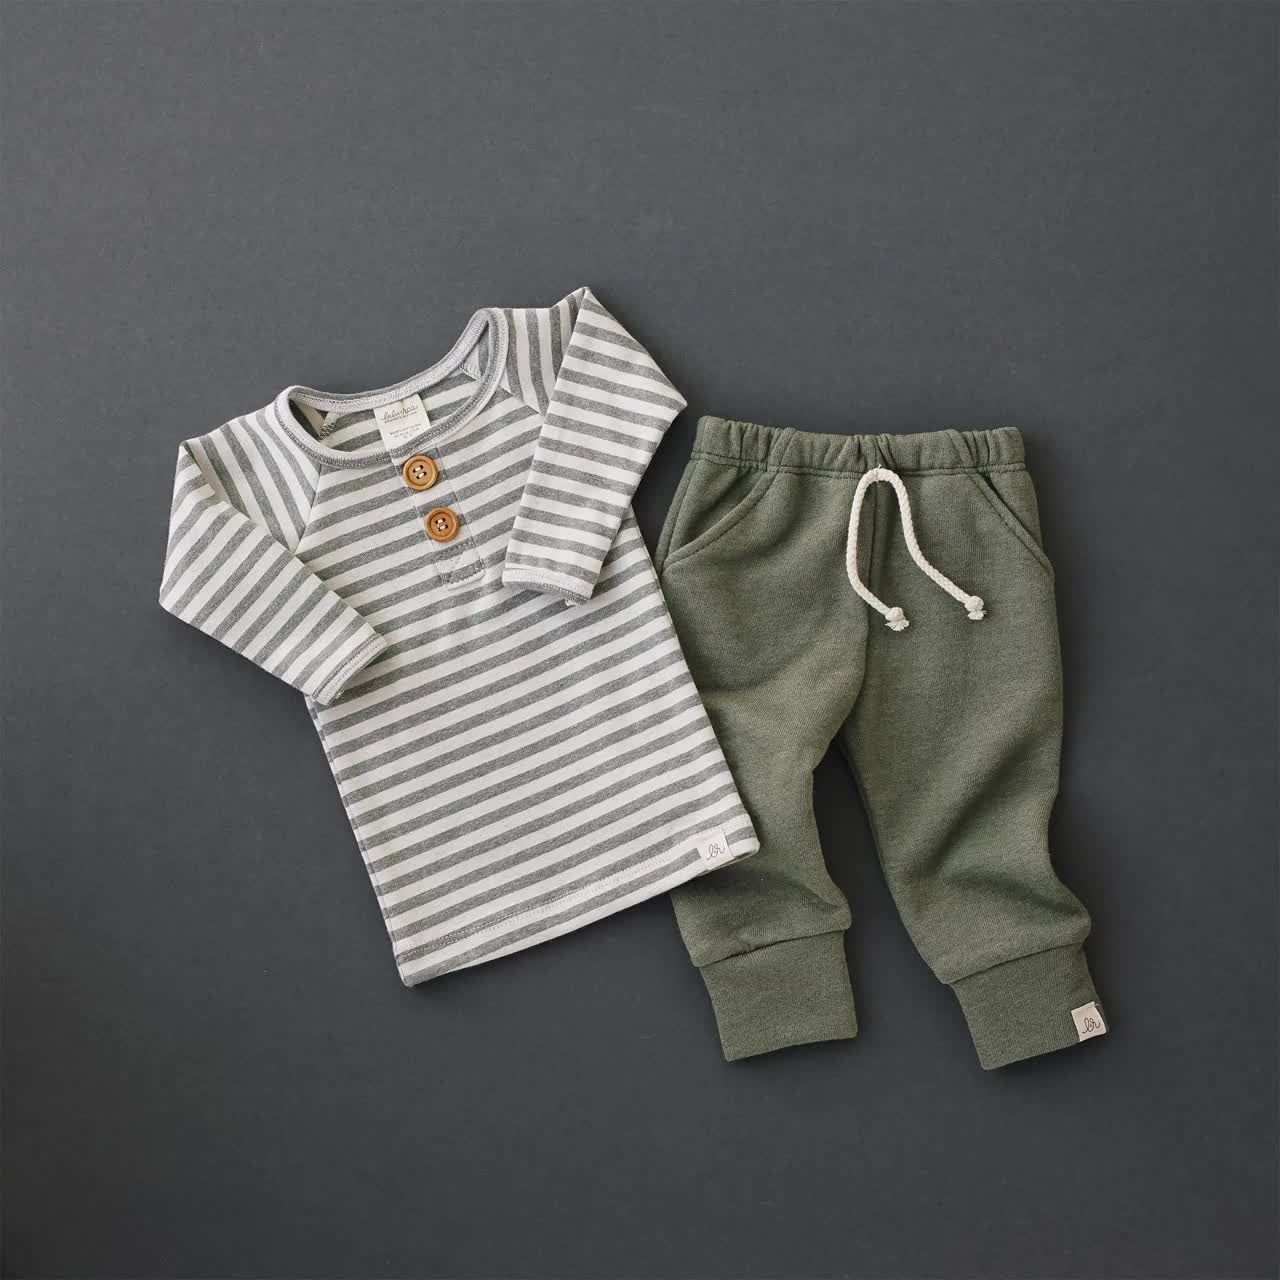 Shop Baby Boy Holiday Style - Shop Baby Boy Holiday Style -   7 style Boy outfits ideas